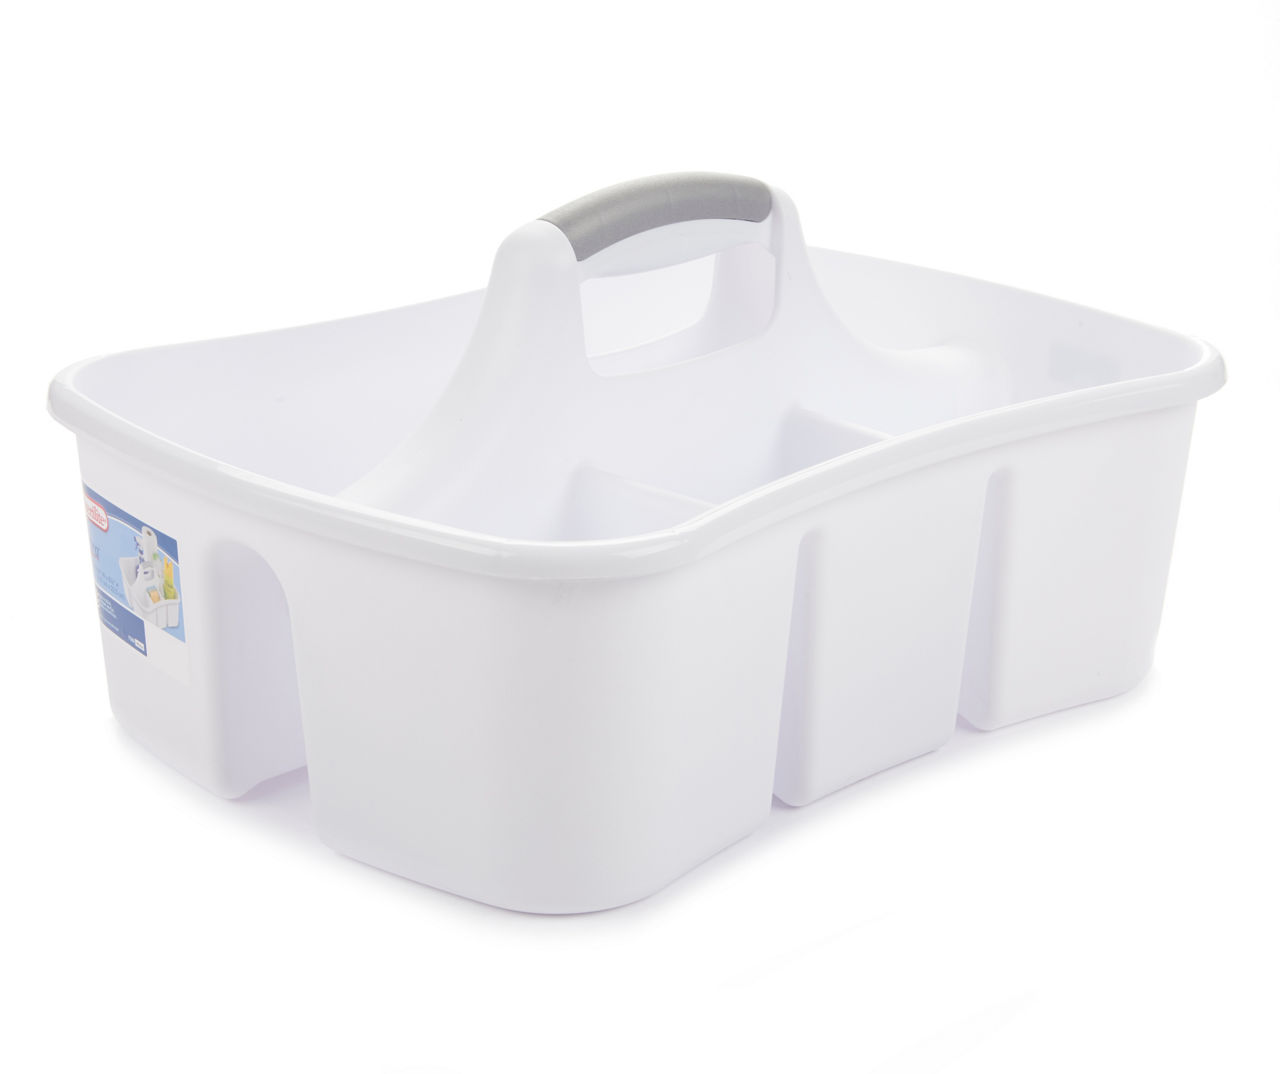 Sterilite Ultra Large Divided Caddy